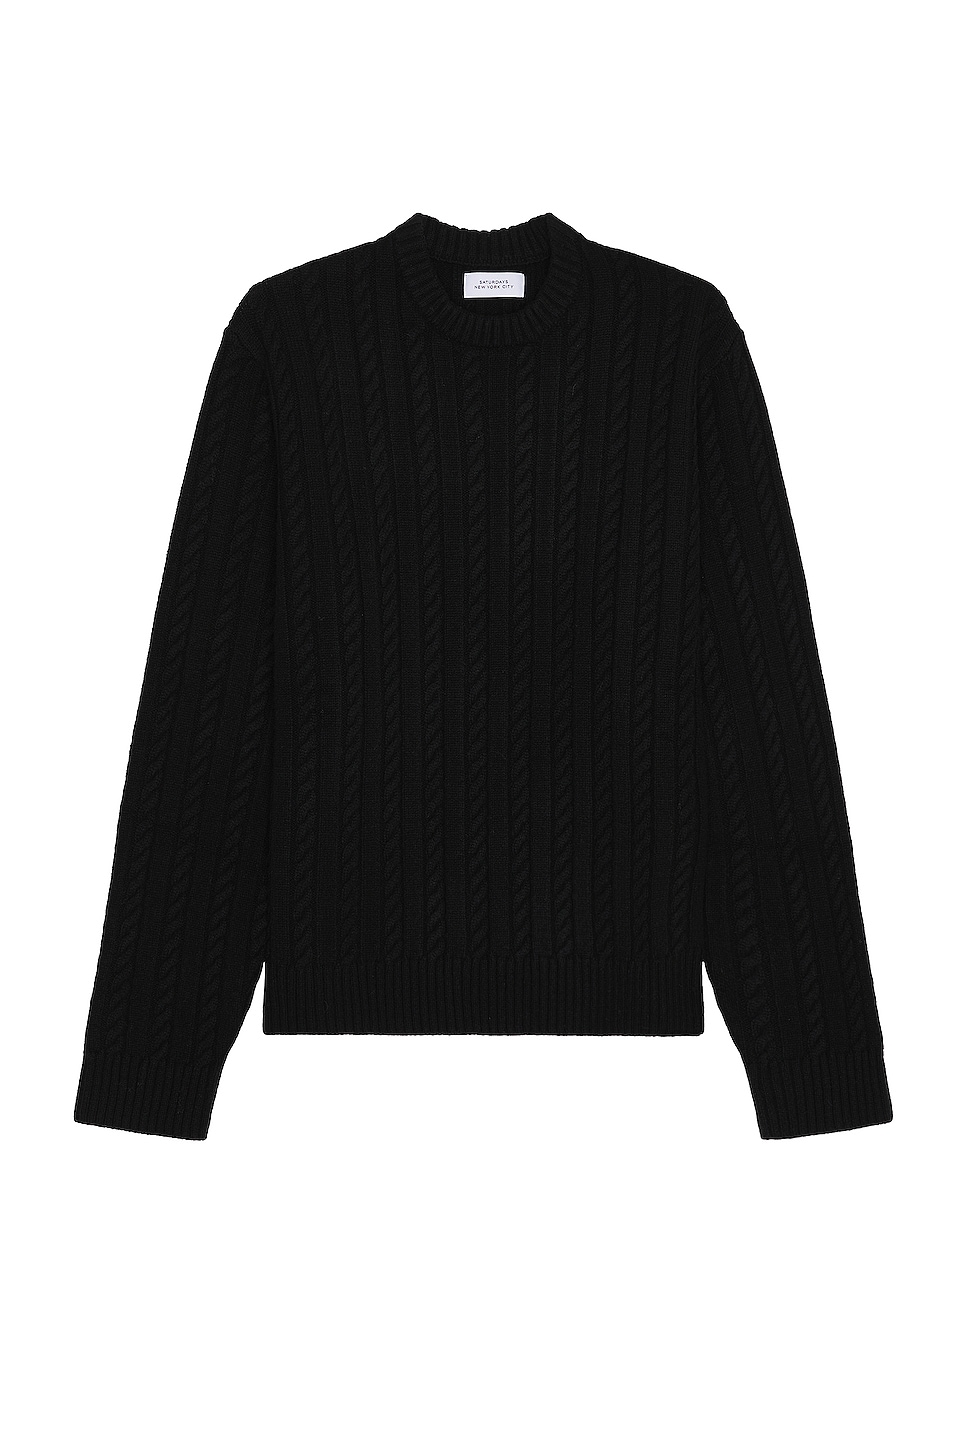 Image 1 of SATURDAYS NYC Nico Cable Knit Sweater in Black